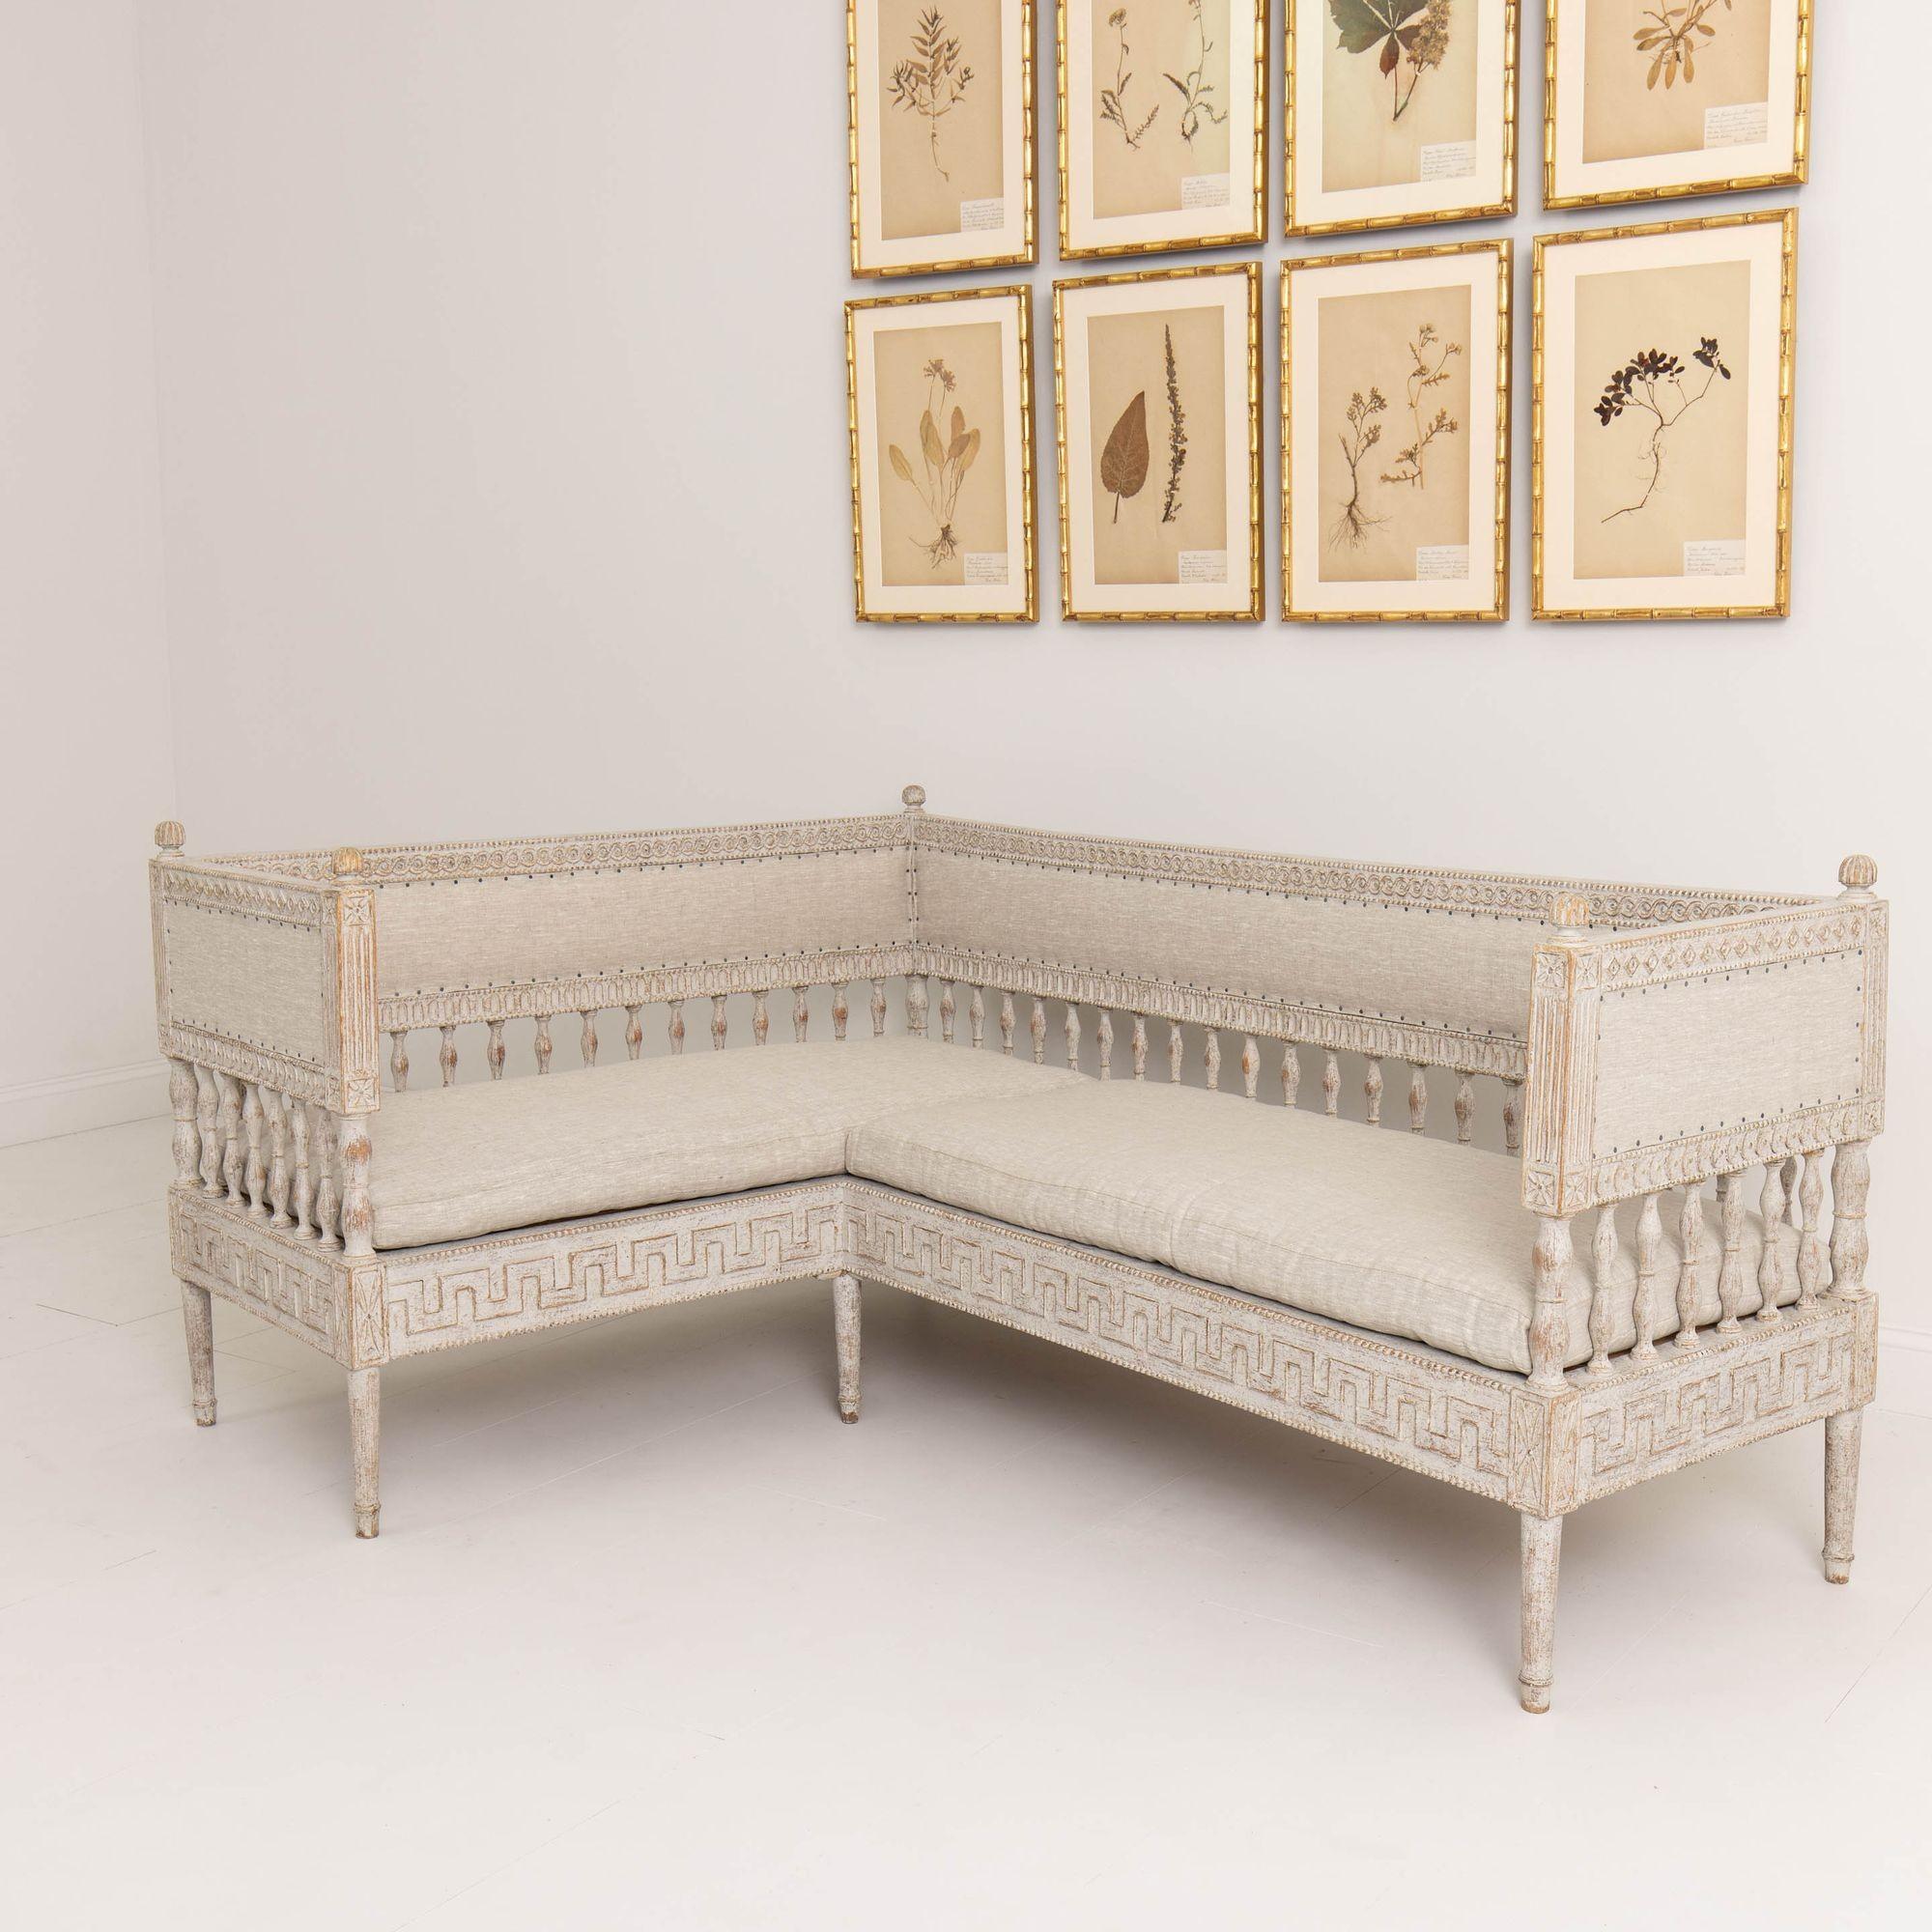 18th c. Swedish Gustavian Period Painted Corner Banquette For Sale 3